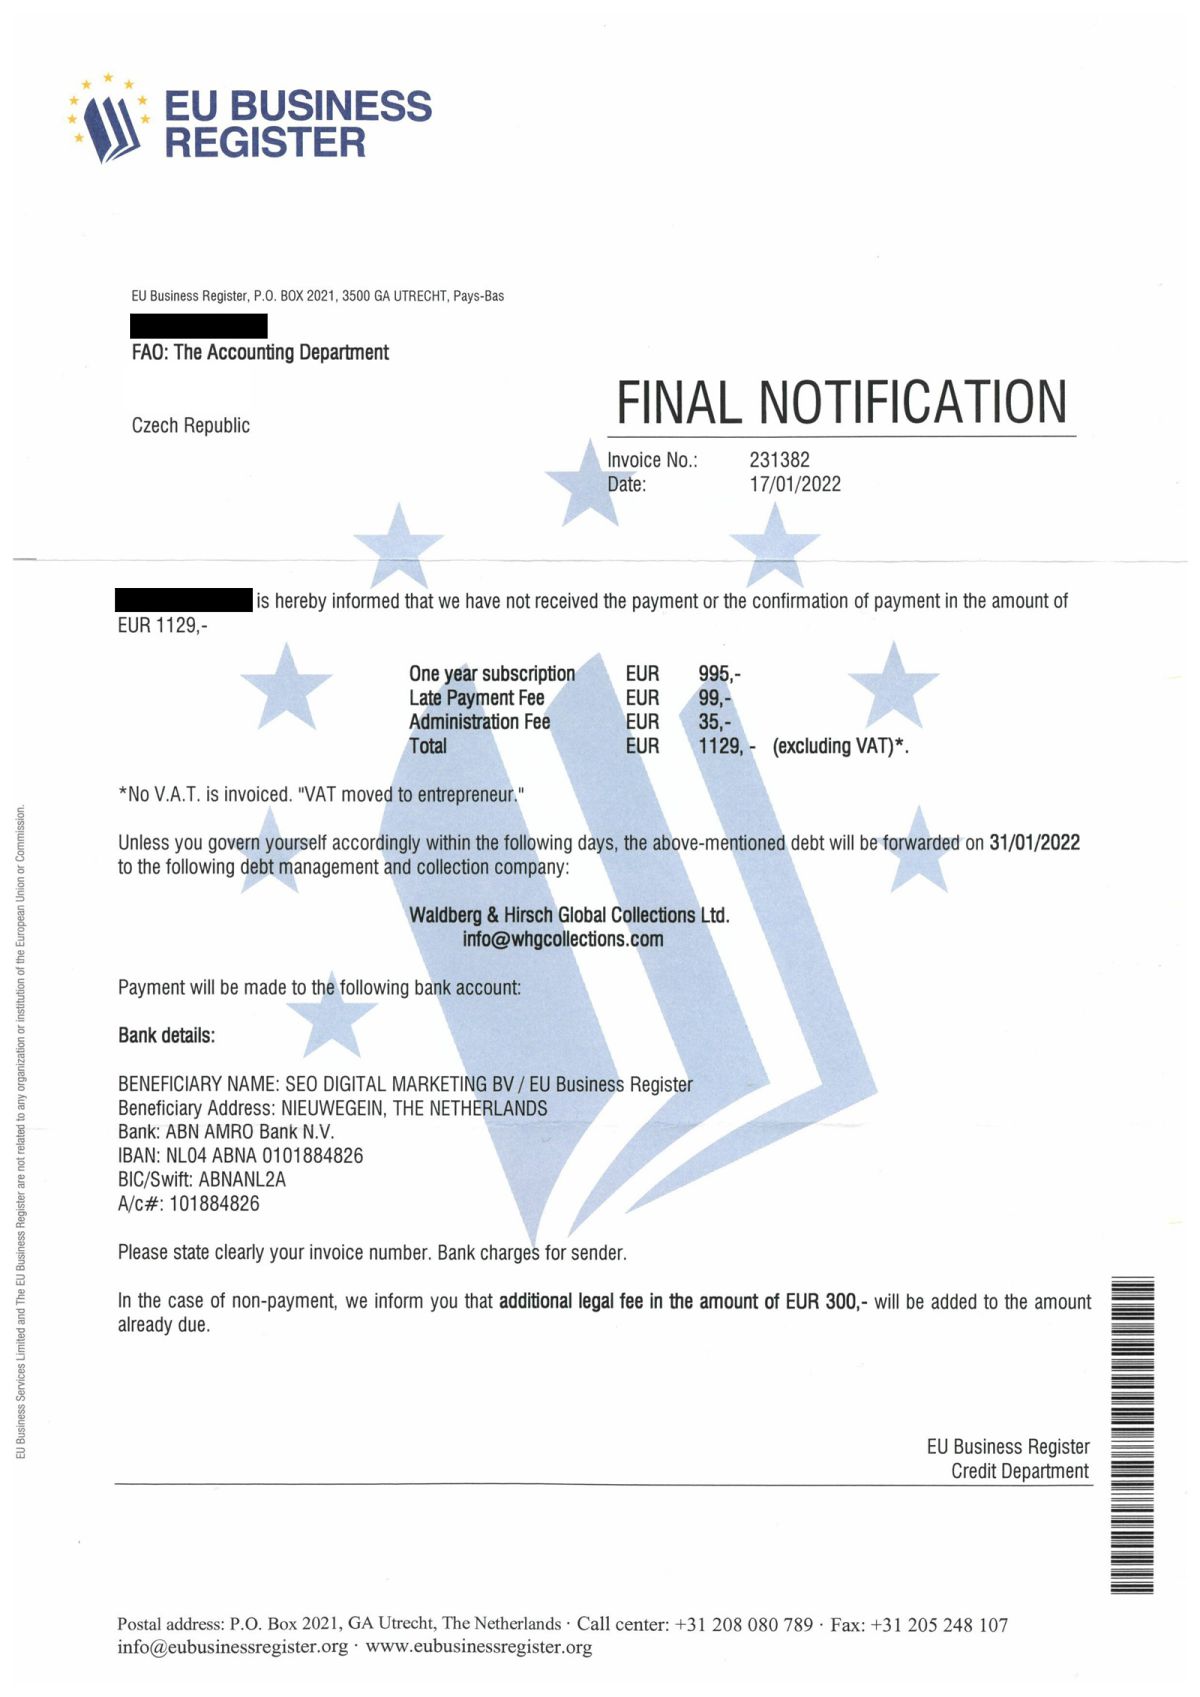 “EU Business Register” spam: what happens if you do not pay